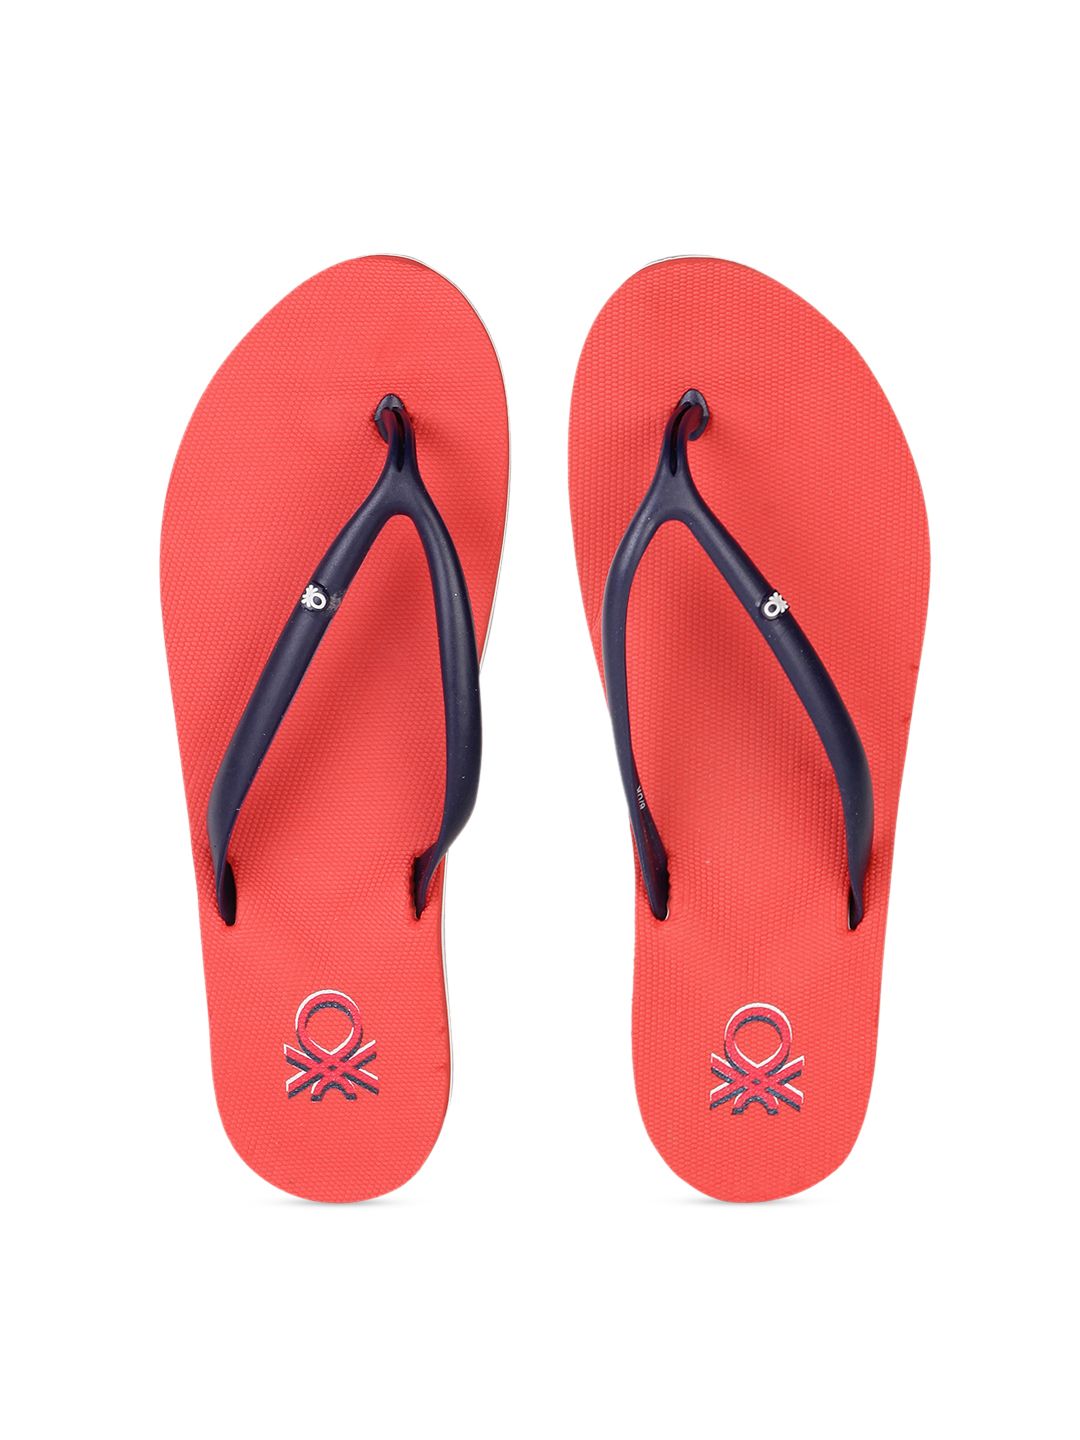 United Colors of Benetton Women Red Printed Thong Flip-Flops Price in India